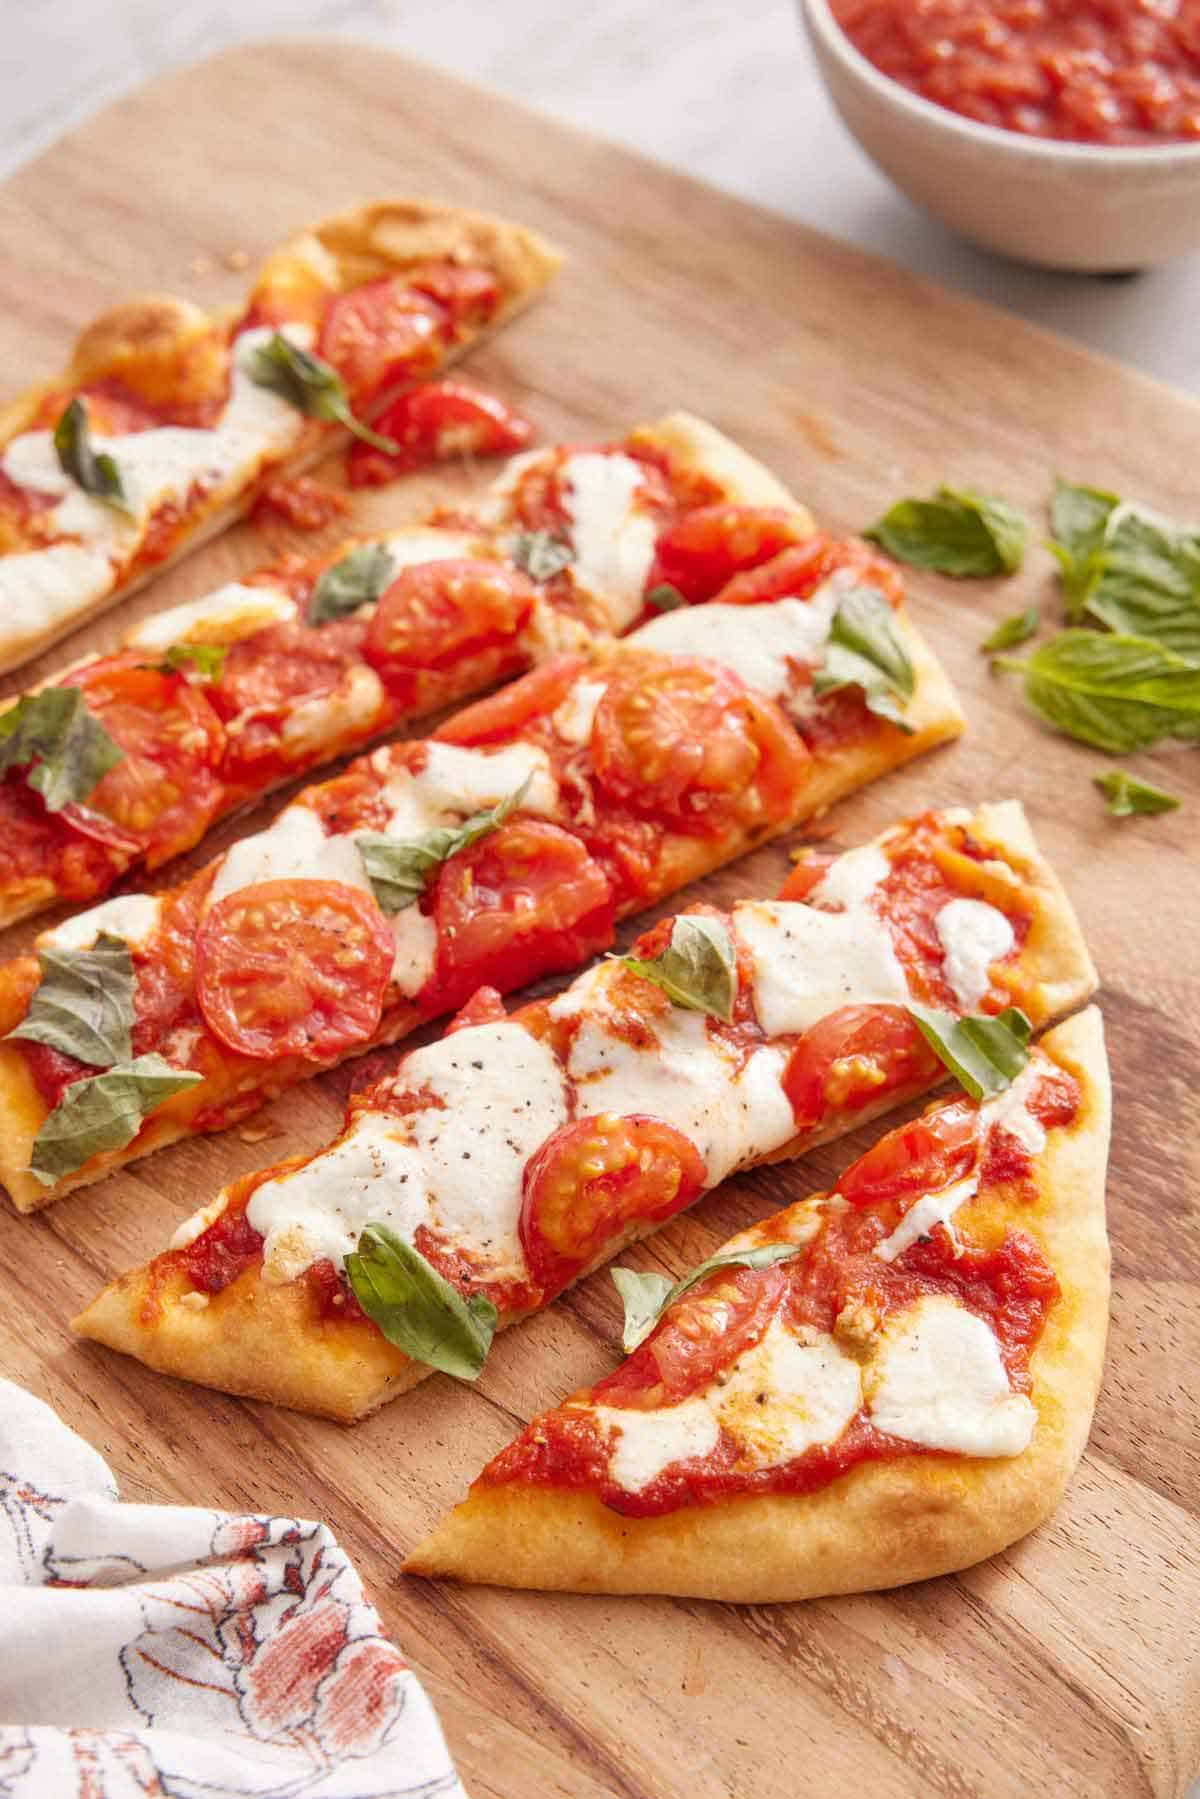 A cutting board with a cut flatbread pizza with some basil.